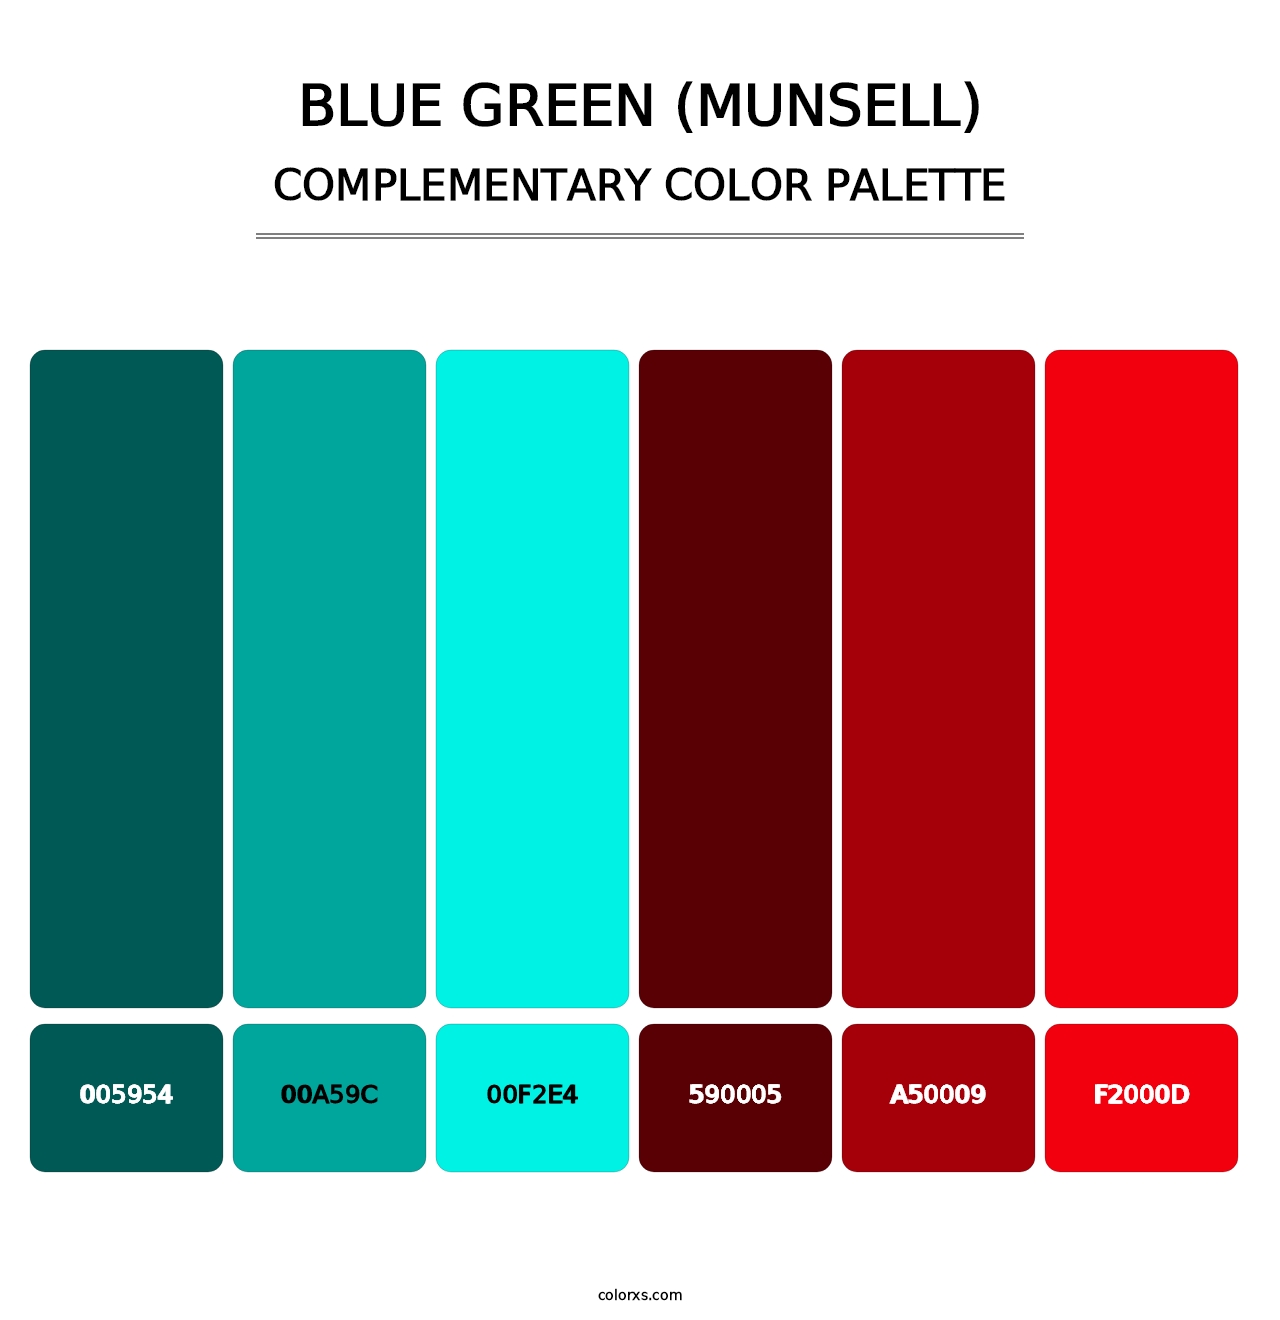 Blue Green (Munsell) - Complementary Color Palette